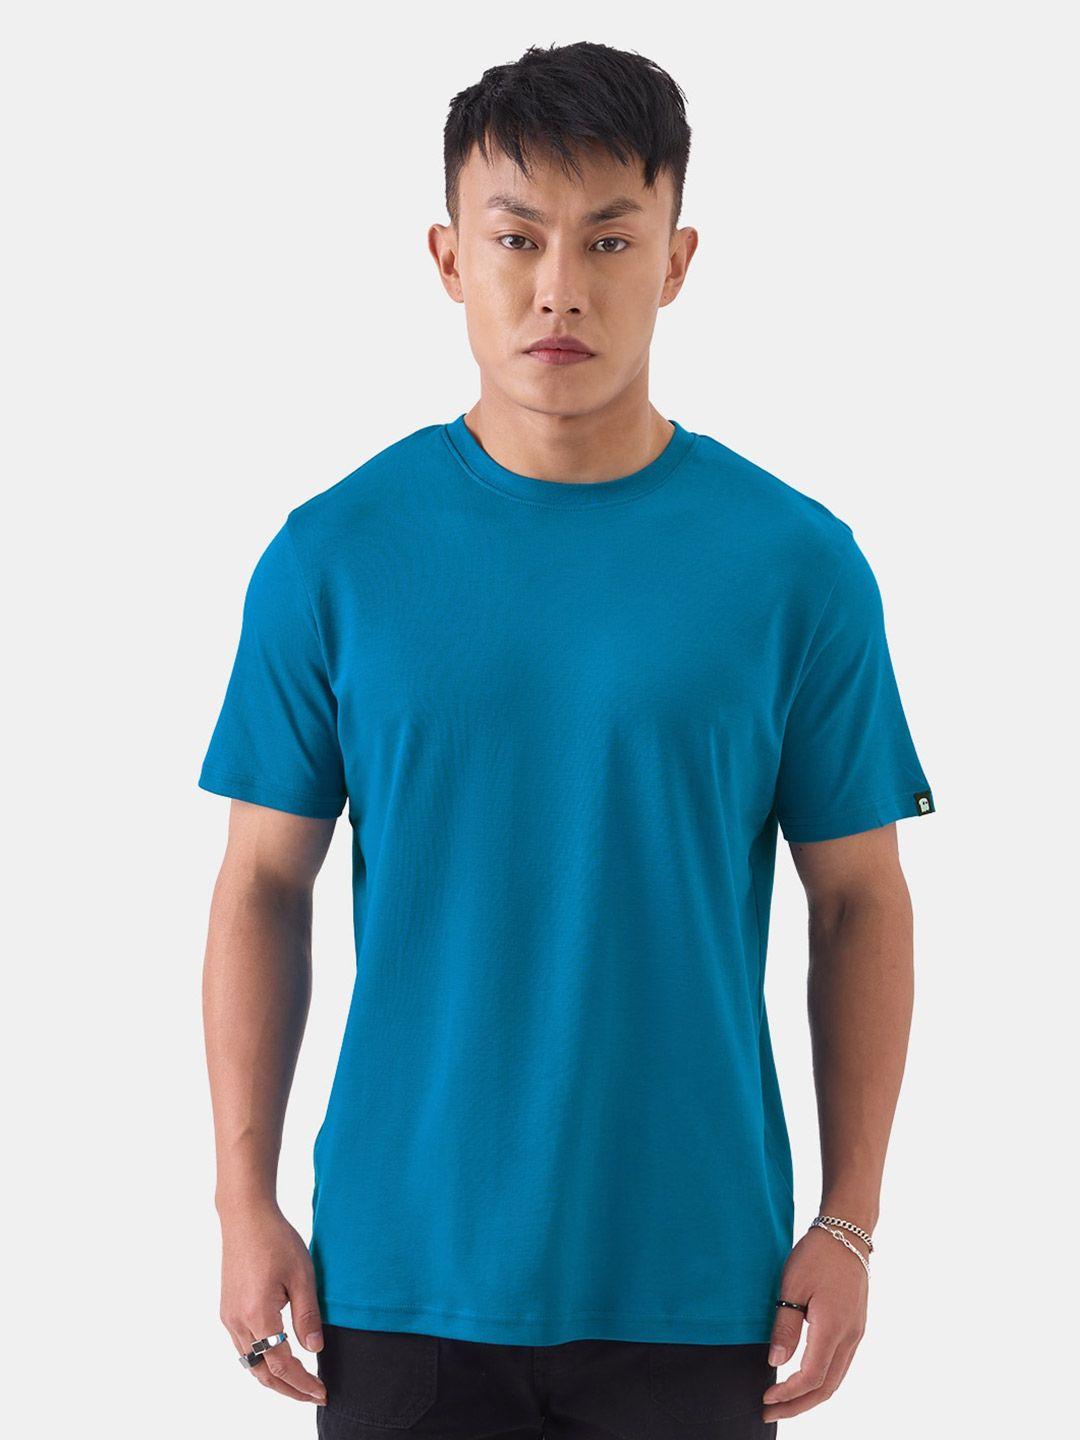 the souled store teal blue round neck pure cotton t-shirt